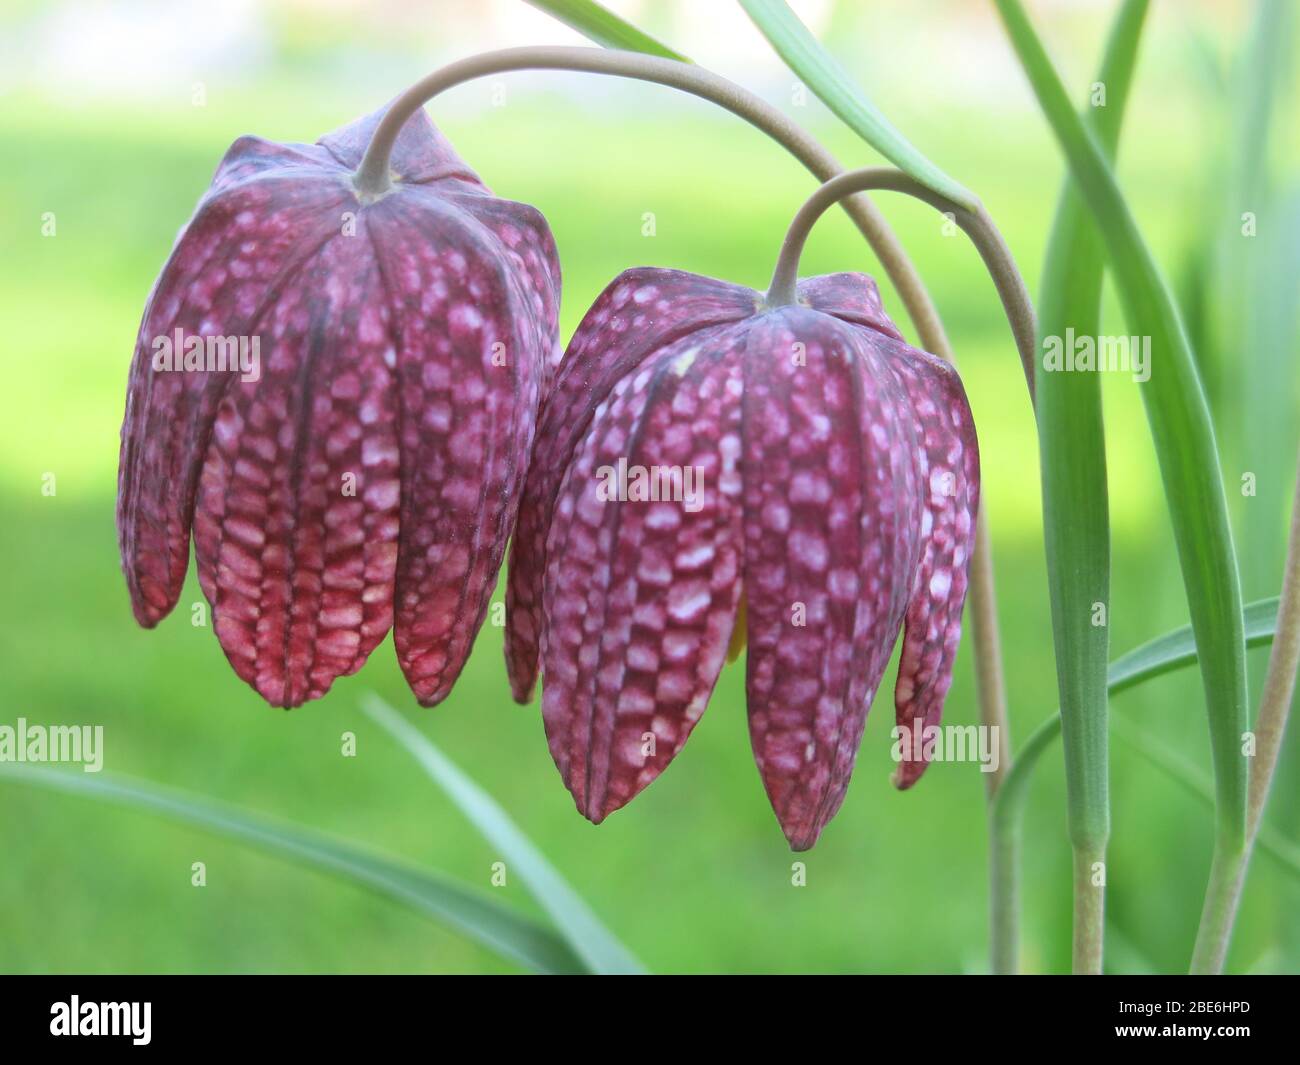 Close-up of two snakeshead fritillaries with their distinctive purple checkerboard pattern. Stock Photo